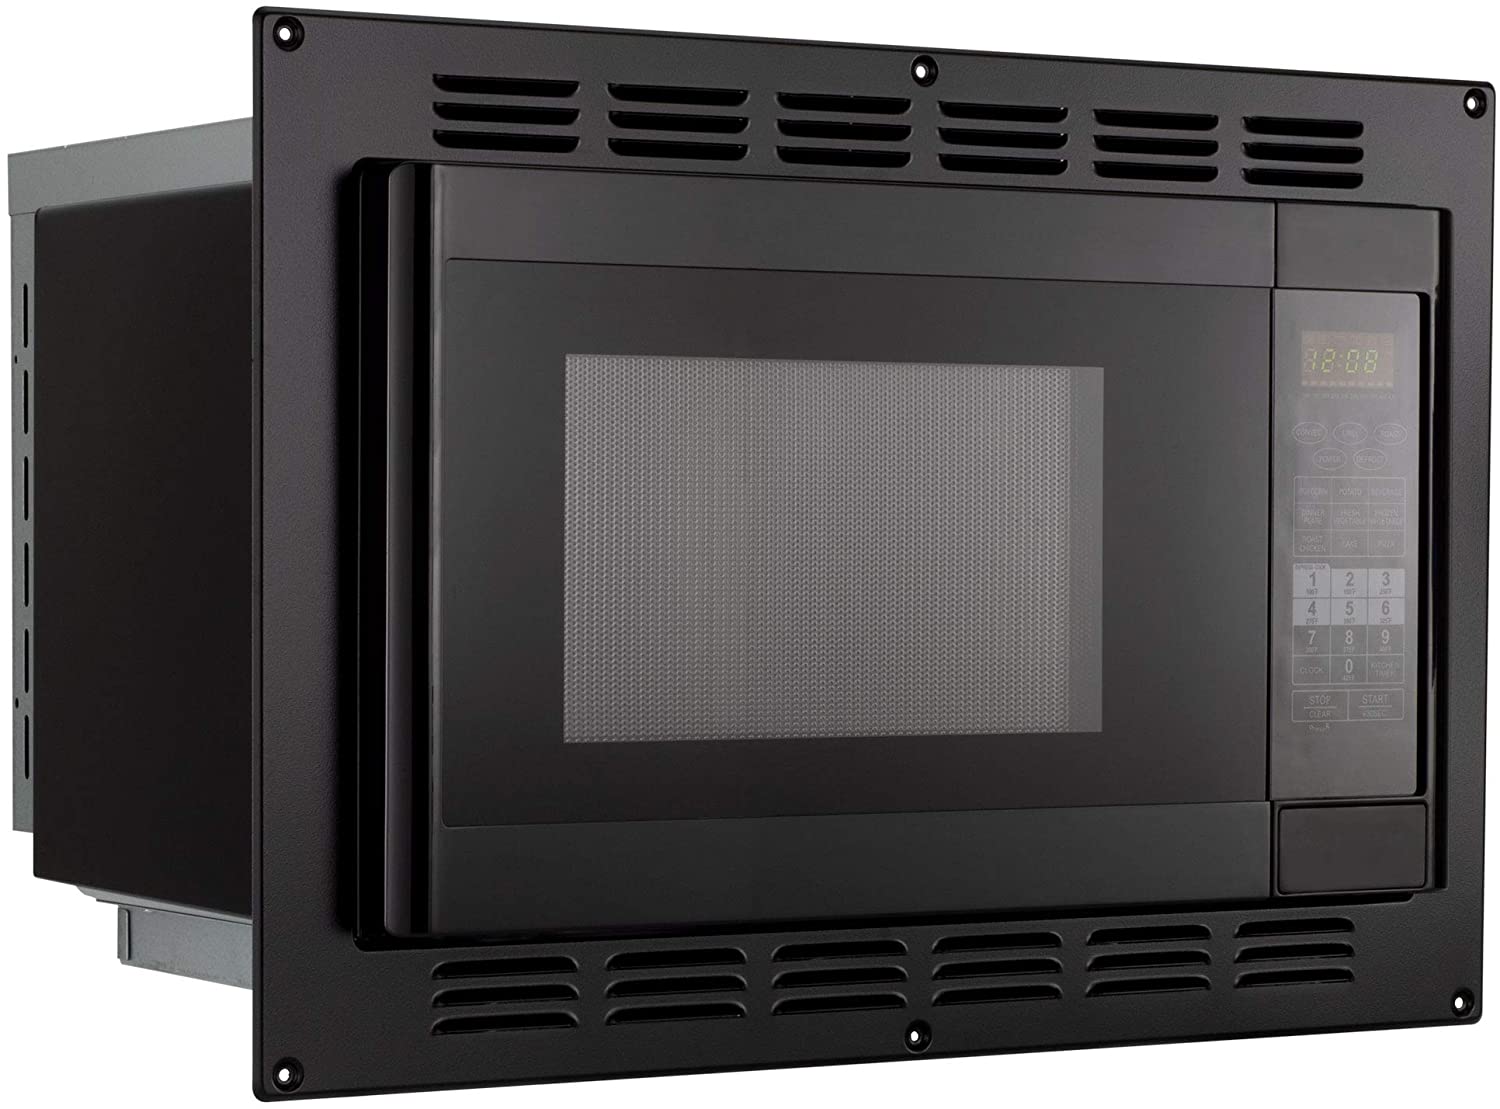 RecPro RV Convection Microwave Oven | Jikonitaste